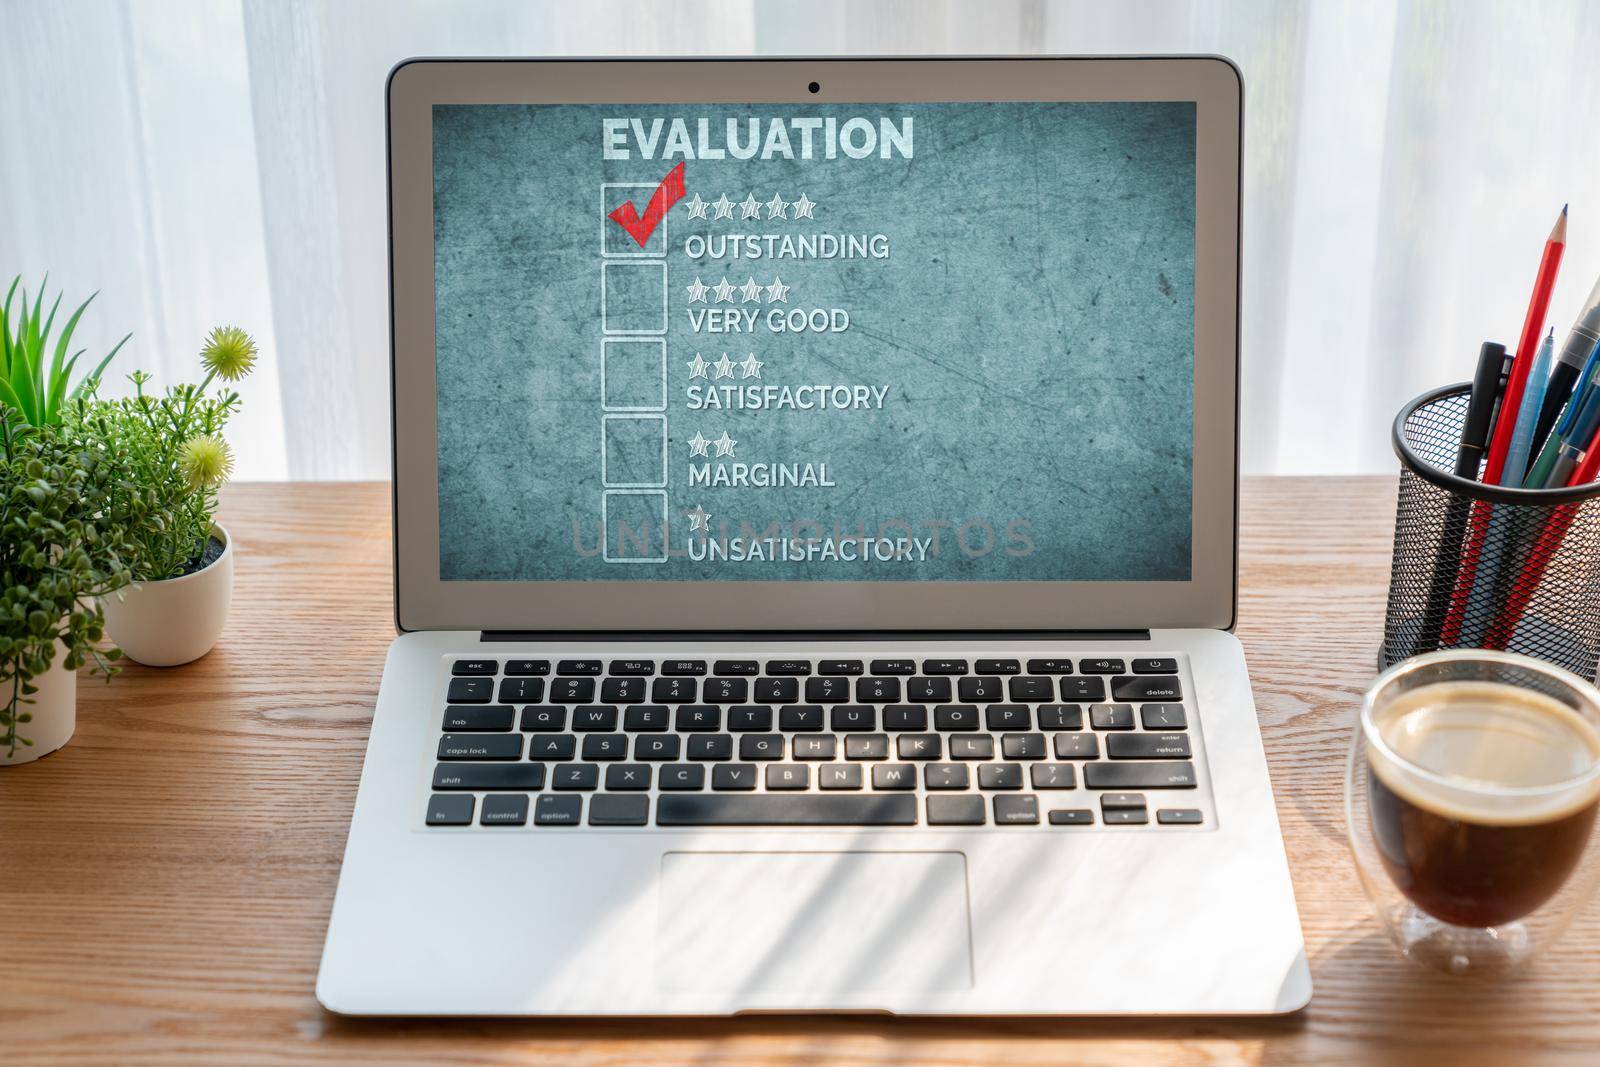 Customer satisfaction and evaluation analysis on modish software computer by biancoblue